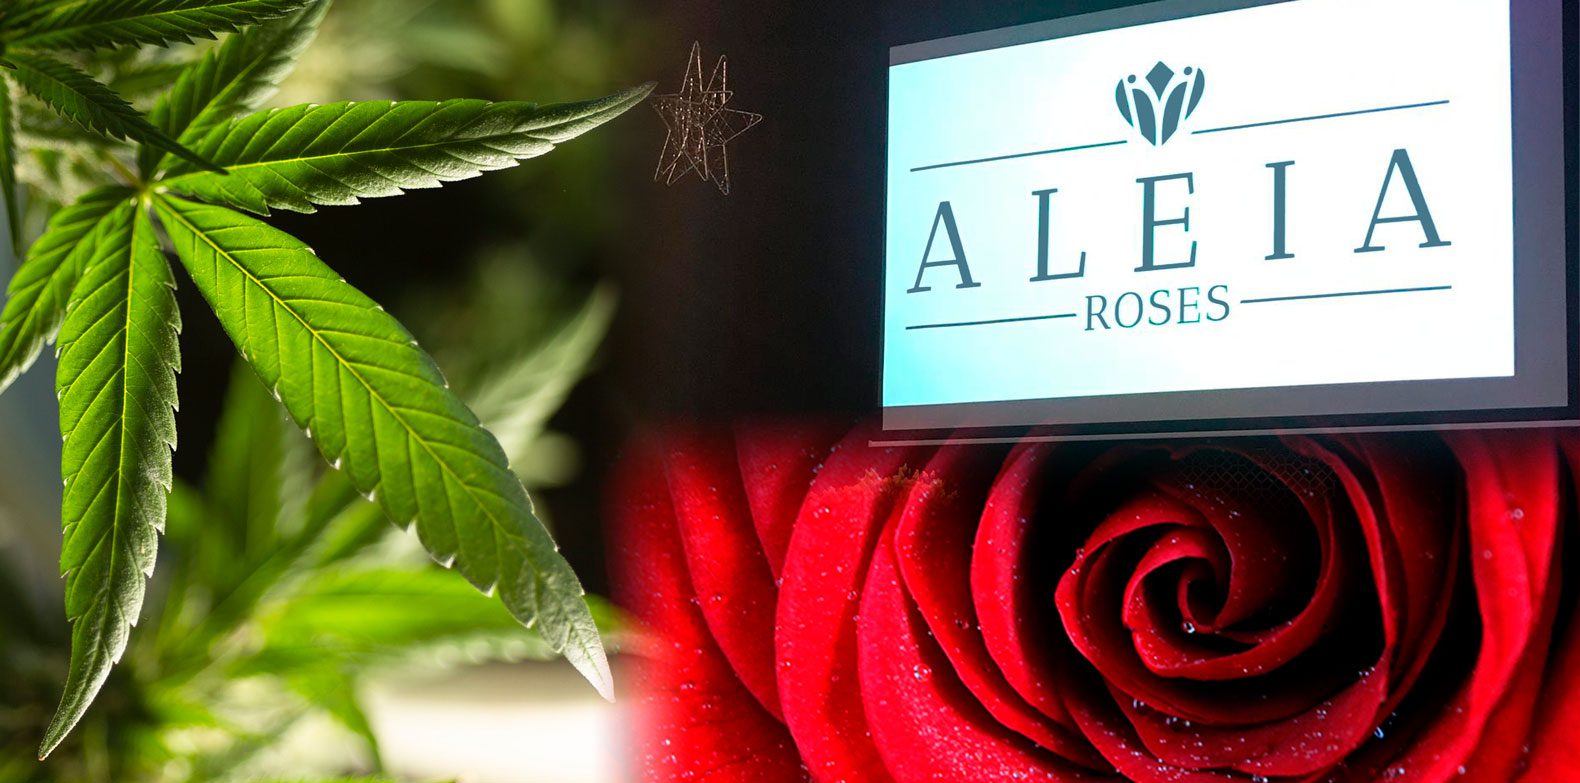 From roses to medical cannabis